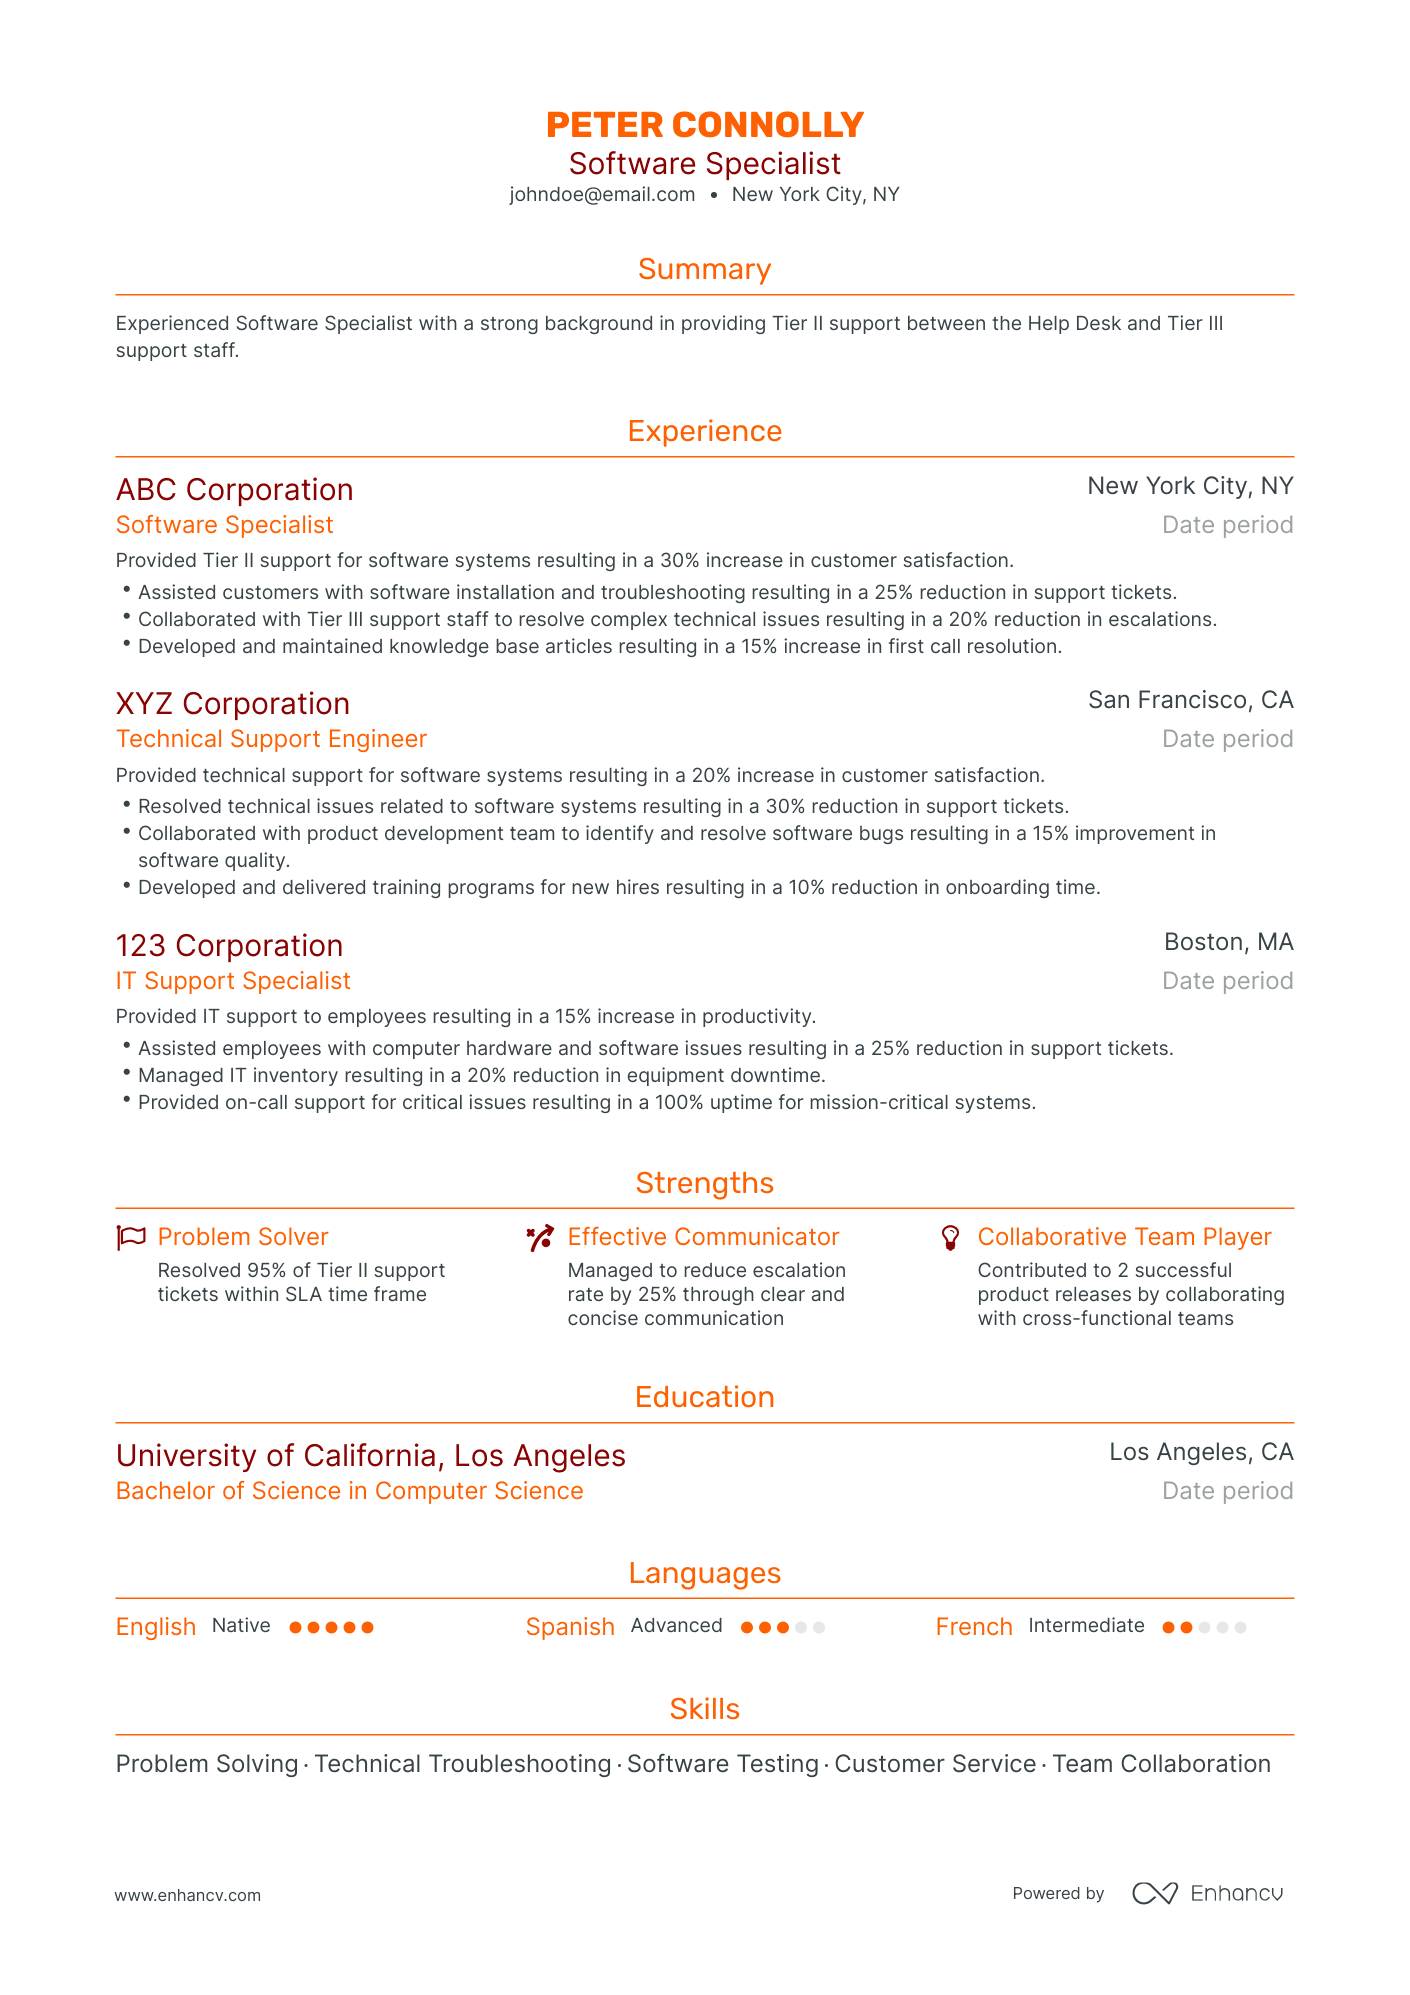 Traditional Software Specialist Resume Template